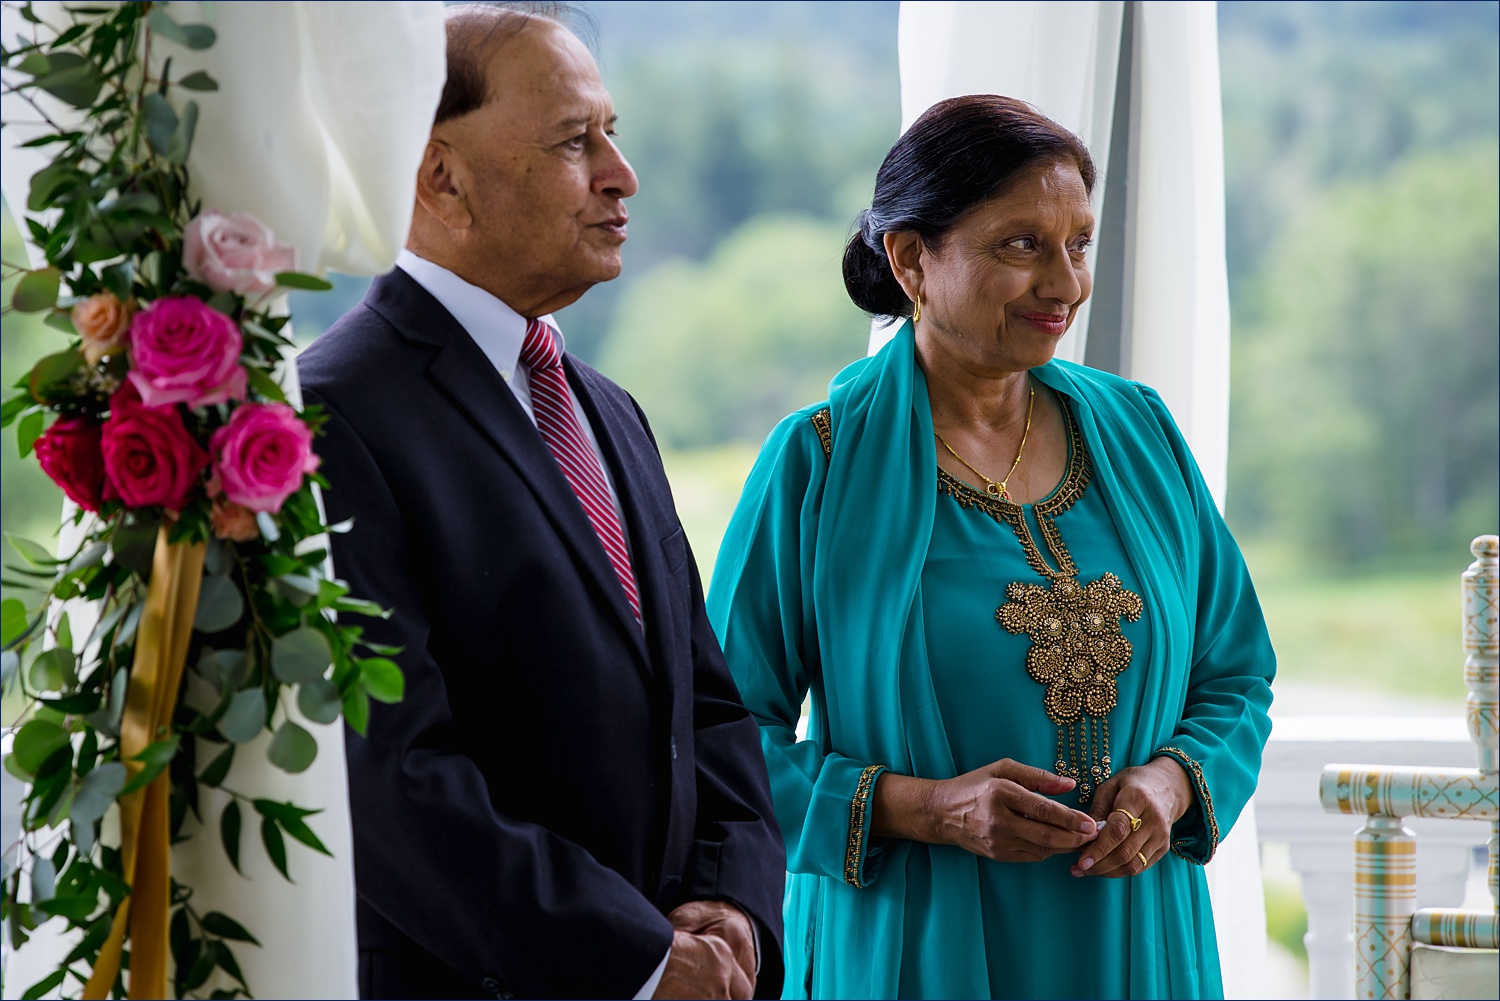 The parents of the bride at the alter of the New Hampshire Hindu wedding ceremony